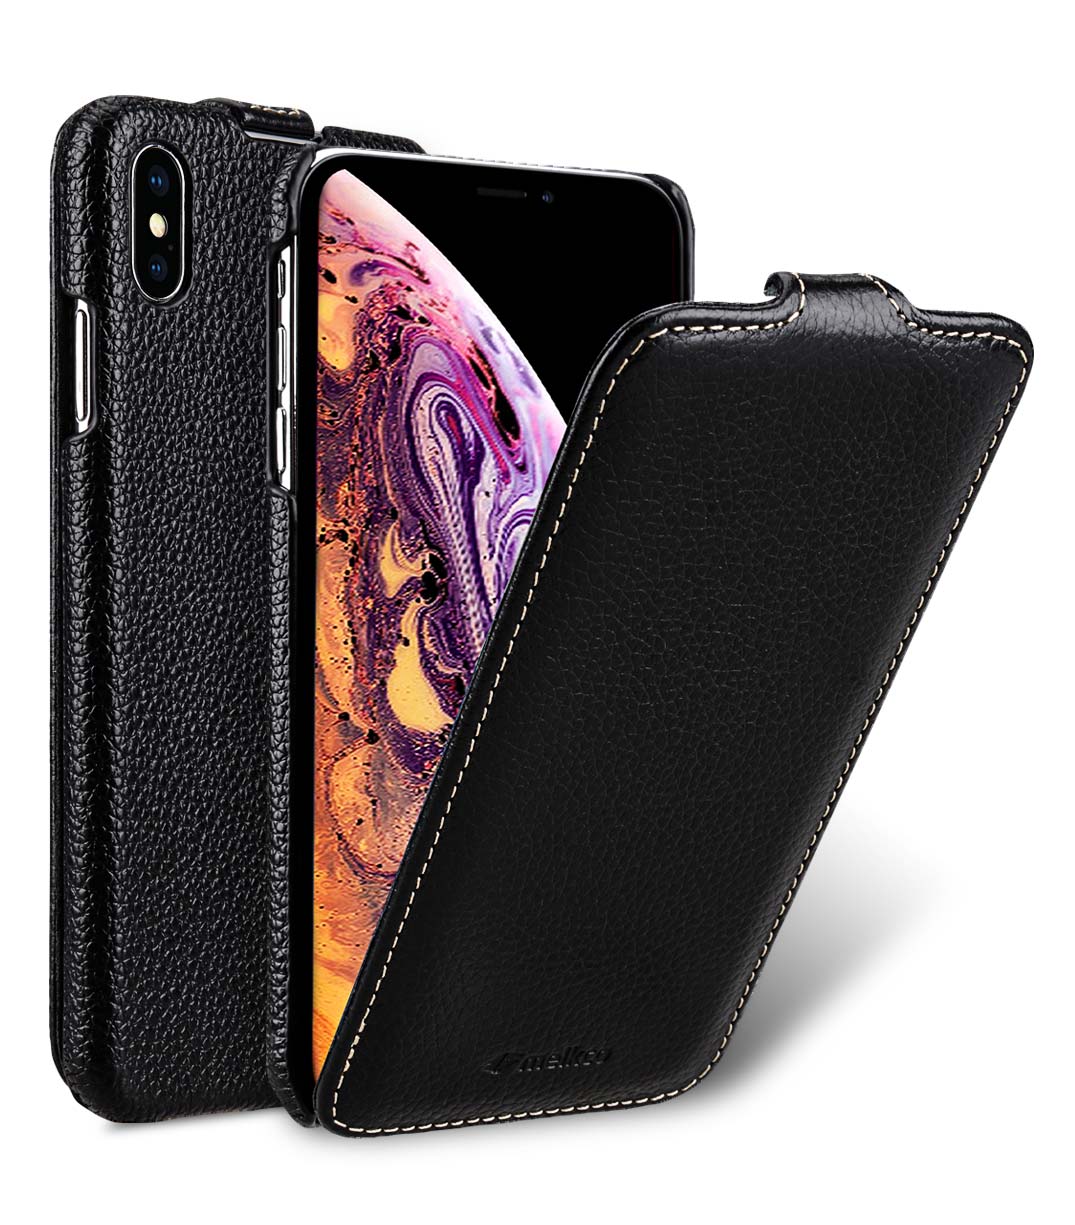 Premium Leather Case for Apple iPhone XS Max - Jacka Type